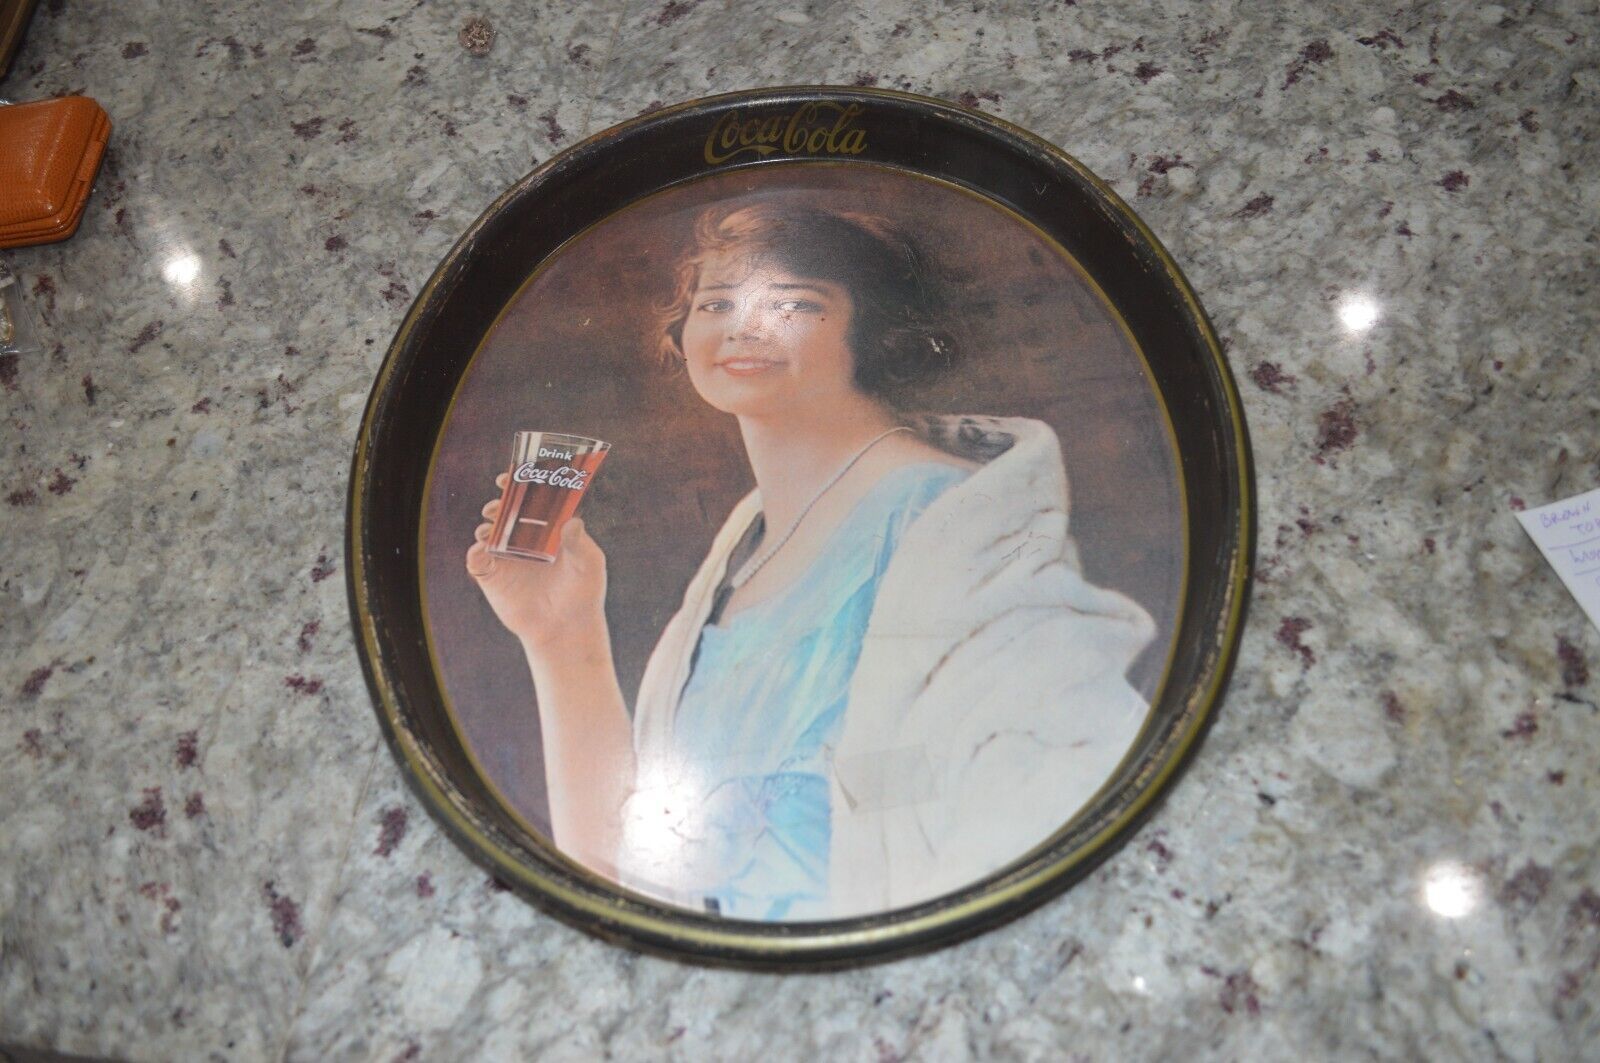 Primary image for Vintage Coca Cola Tray, 1930's Woman w Pearls, midcentury